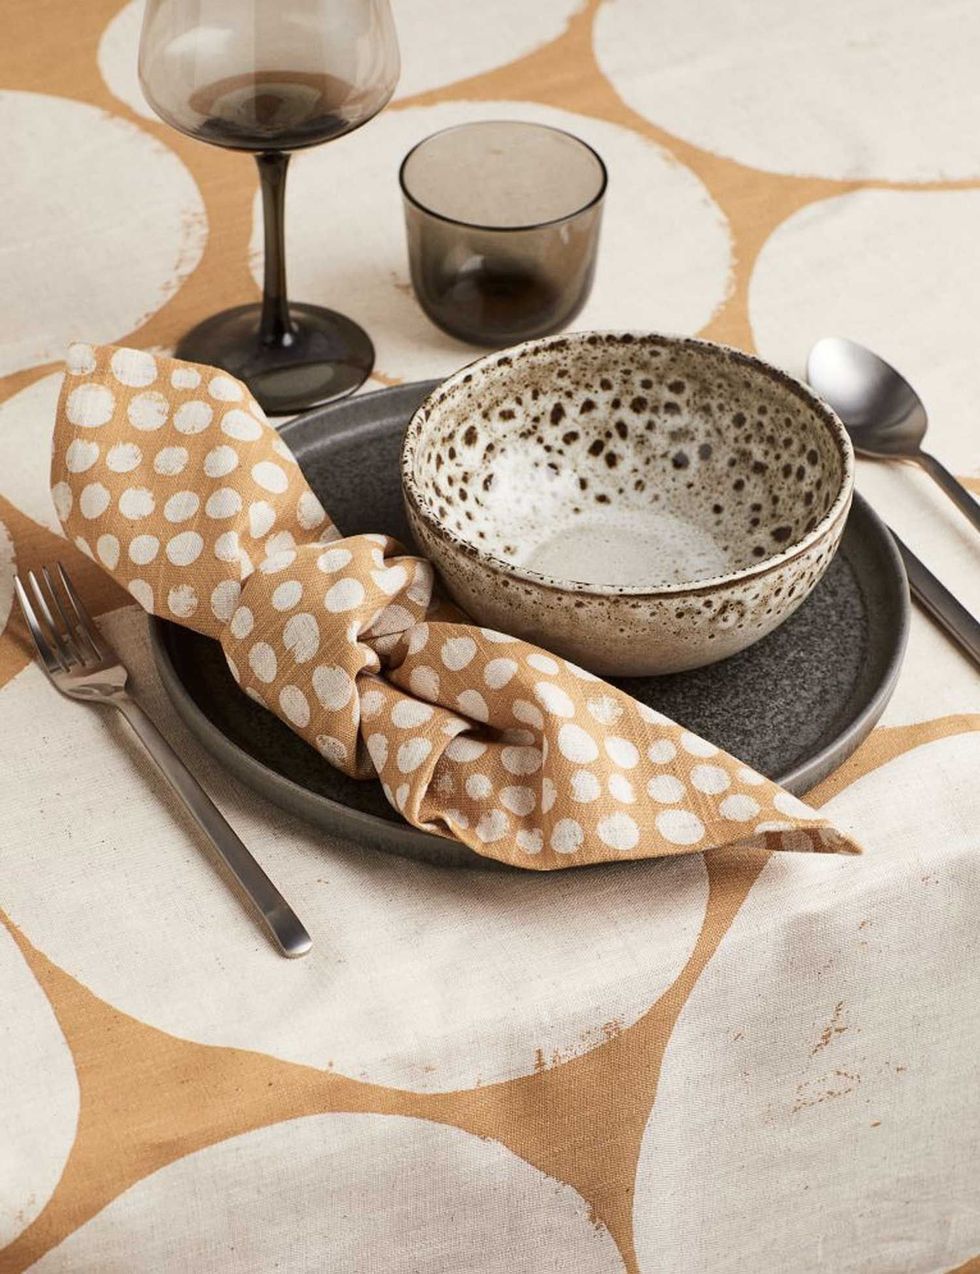 Patterned tablecloth